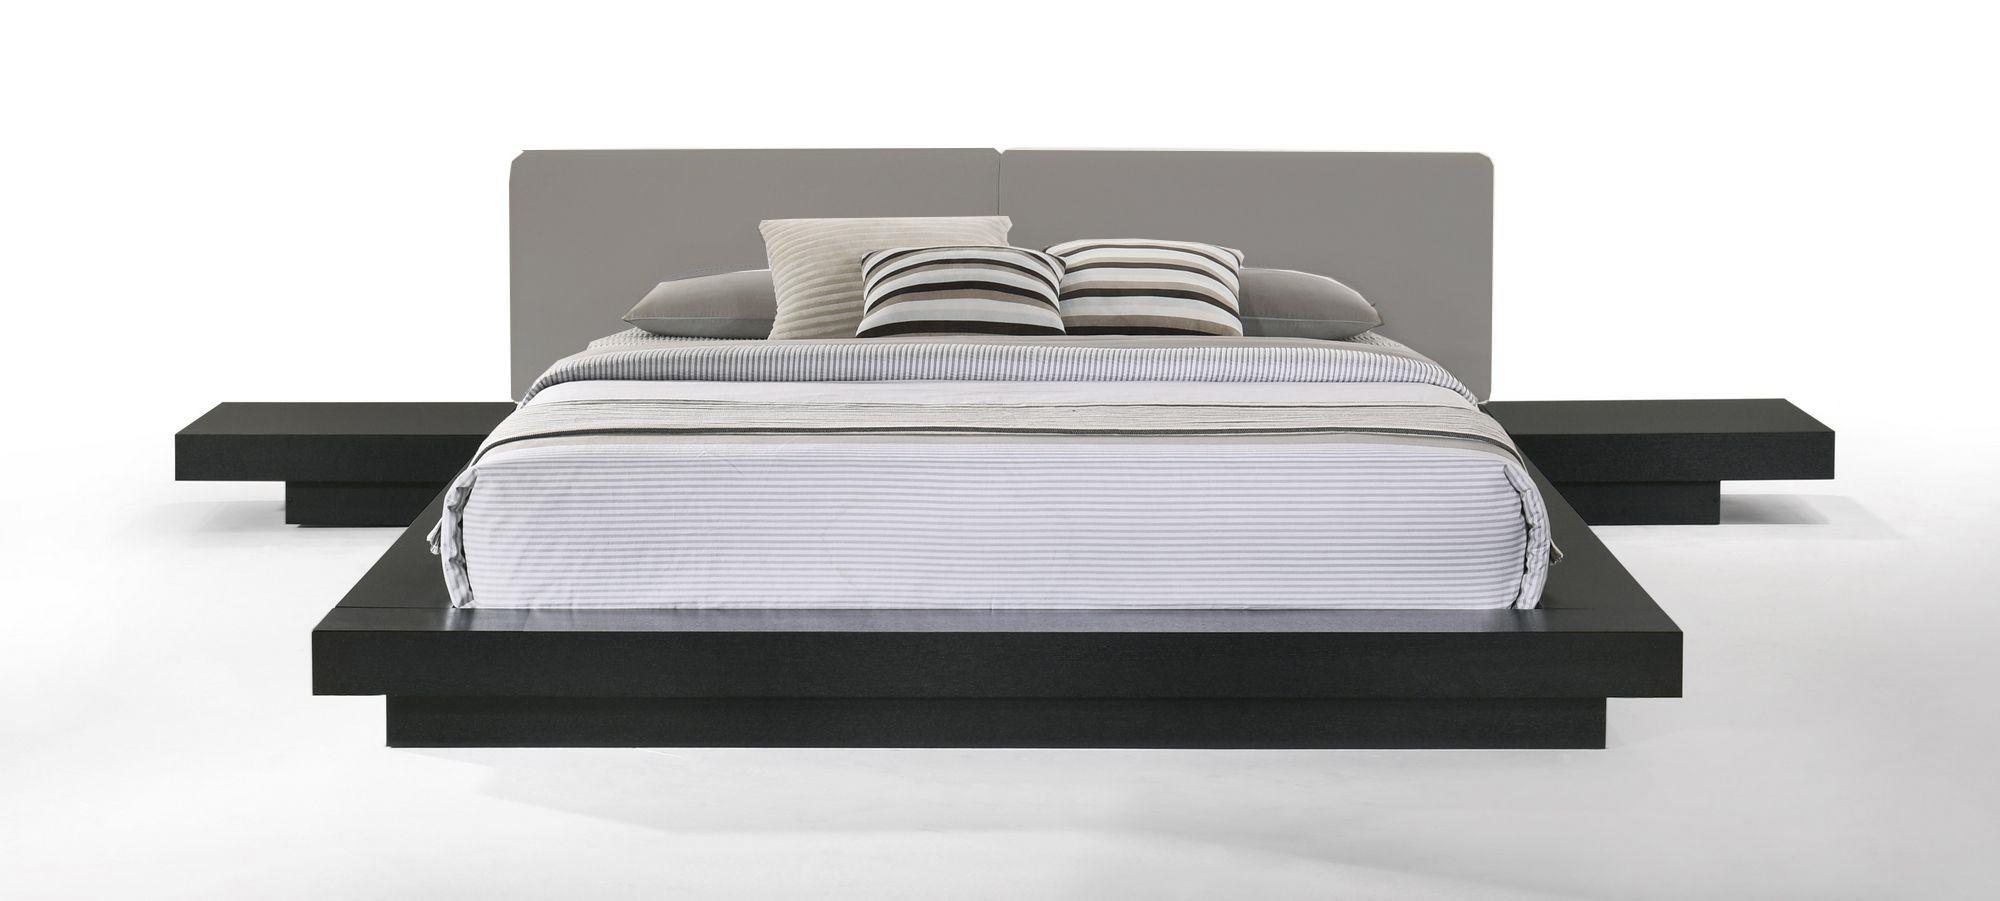 Contemporary, Modern Platform Bed Tokyo VGMABR-90-BLK-GRAY in Gray, Black Leatherette